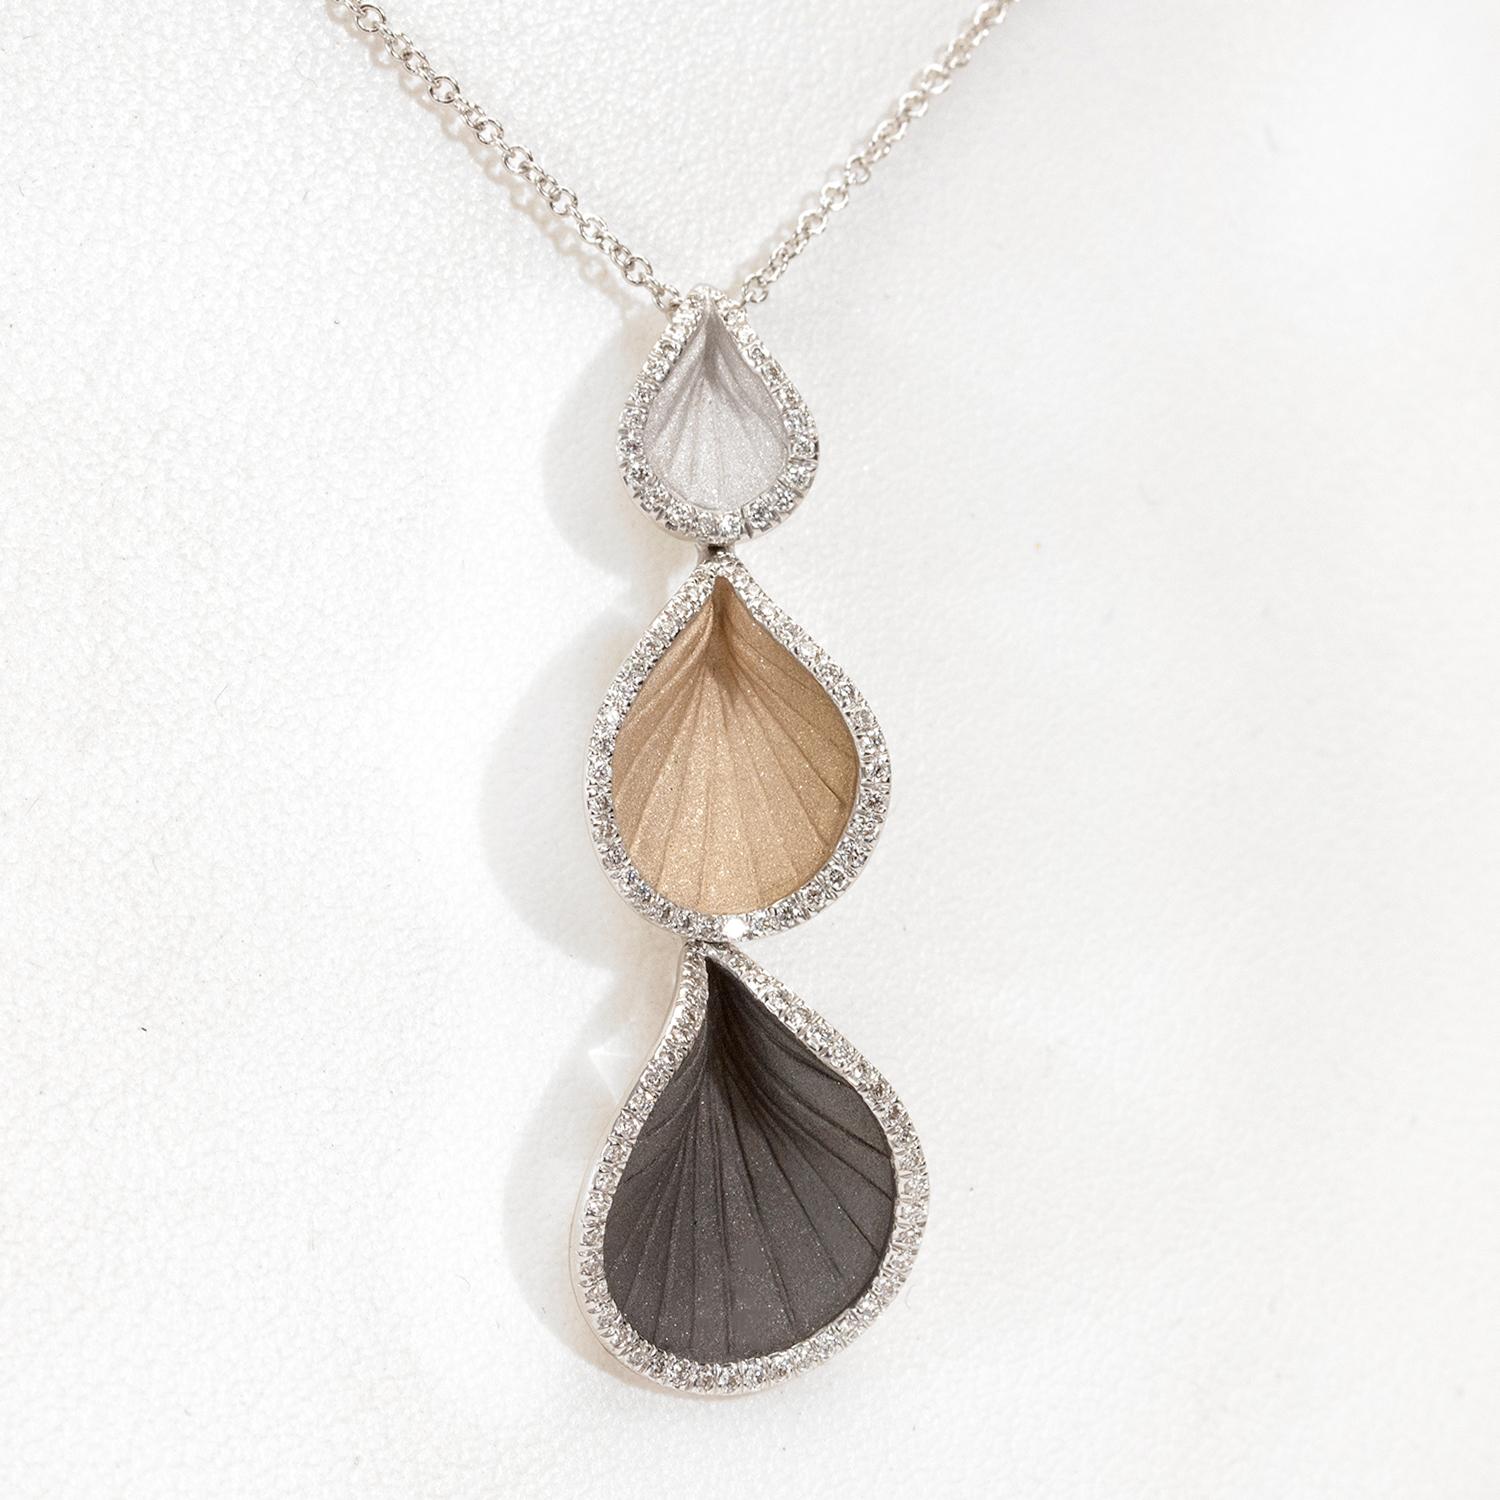 From Annamaria Cammilli's Vision collection, three drop Goccia pendant necklace handcrafted in 18 karat Black Lava, Natural Beige and White Ice gold. Three teardrop shaped petals in white, beige and black gold are outlined with white bead set